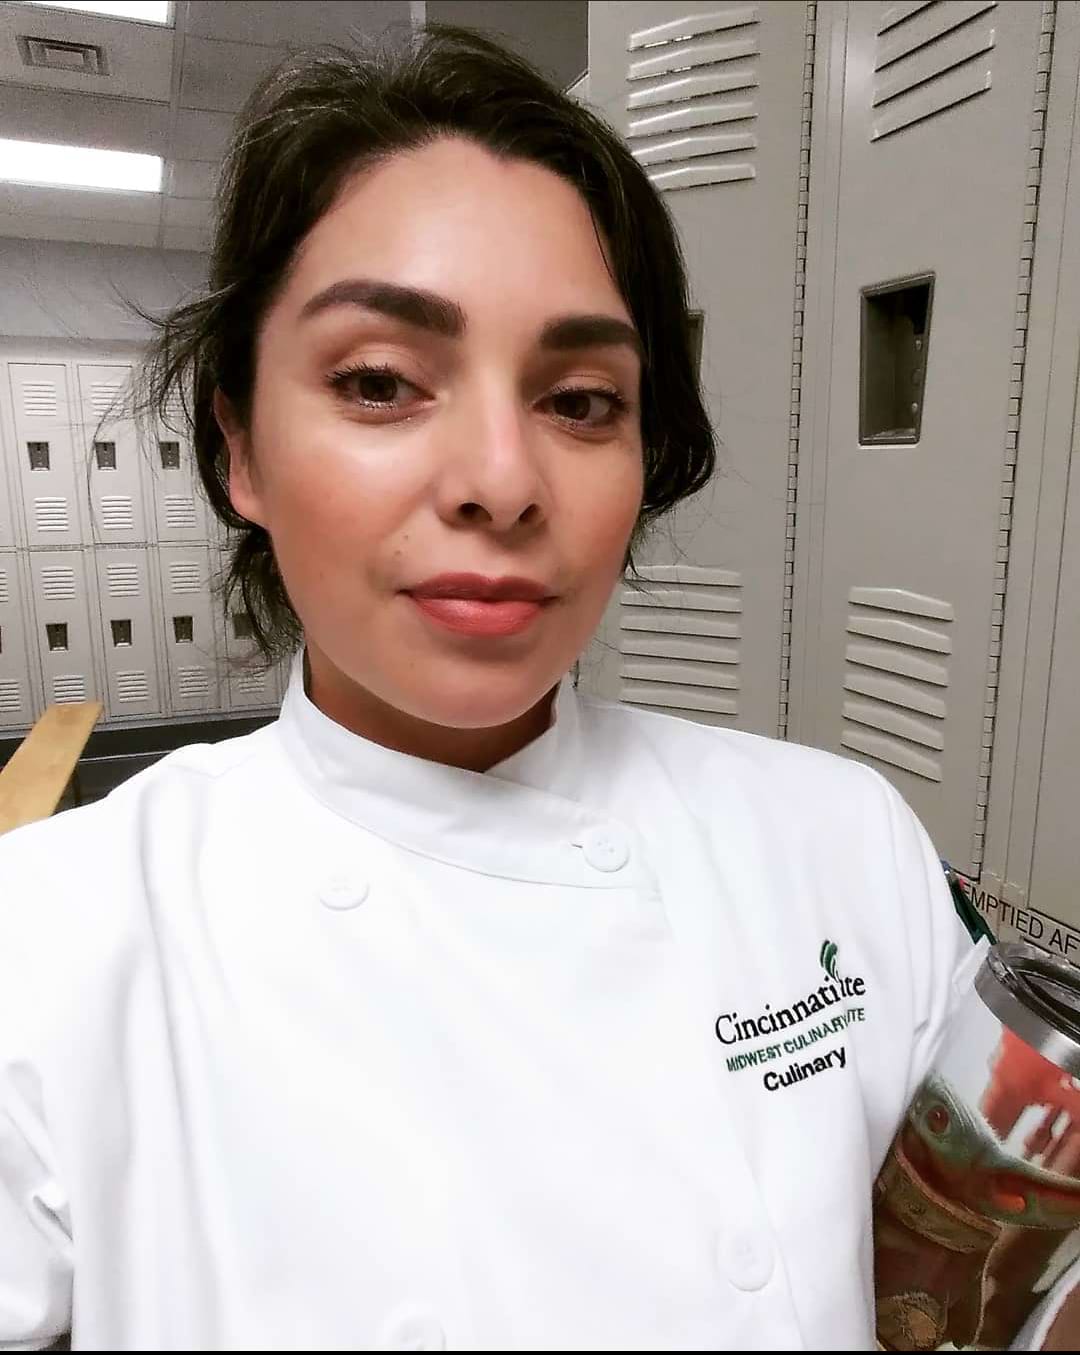 Andrea Lazos stands in her chef coat with her competition entry, as the one of the peoples choice winners of the 2022 National Collegiate Veal Competition.